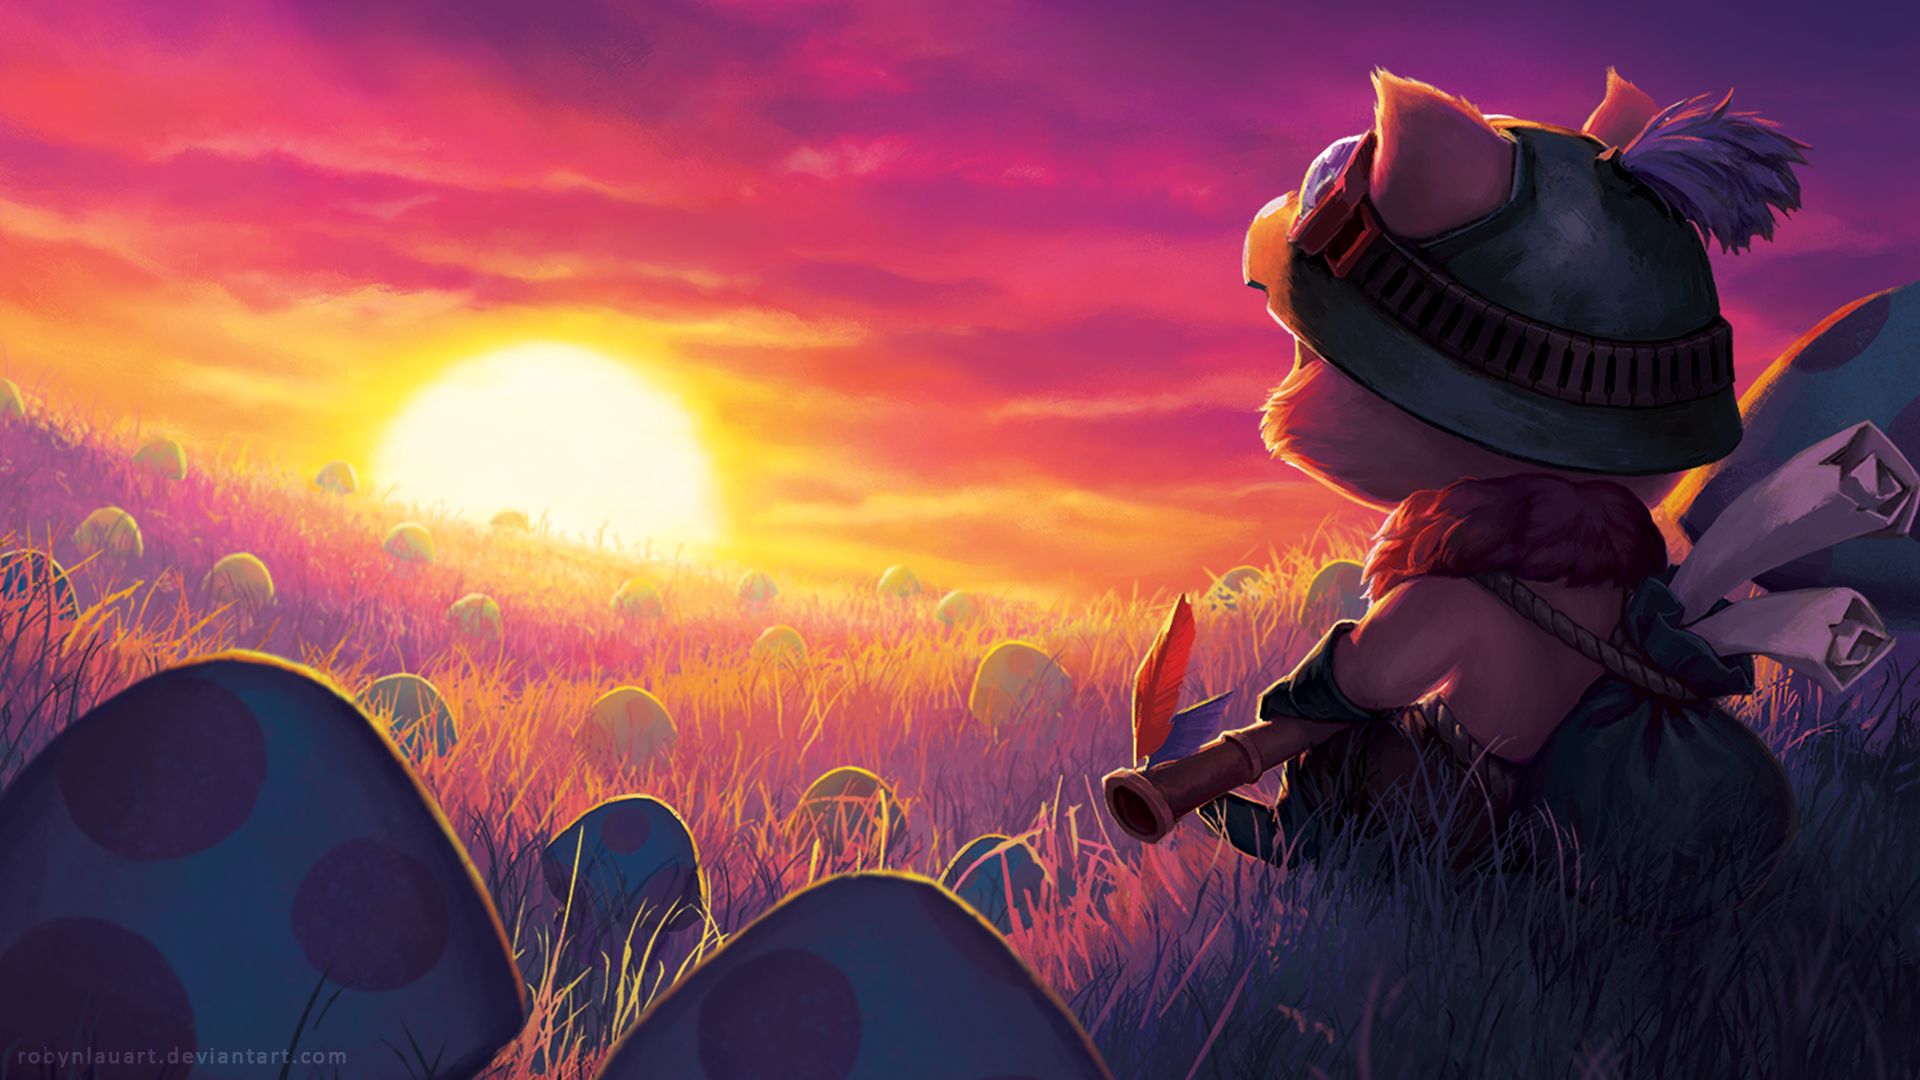 sunset, mushroom, league of legends, video game, field, teemo (league of legends) wallpaper for mobile